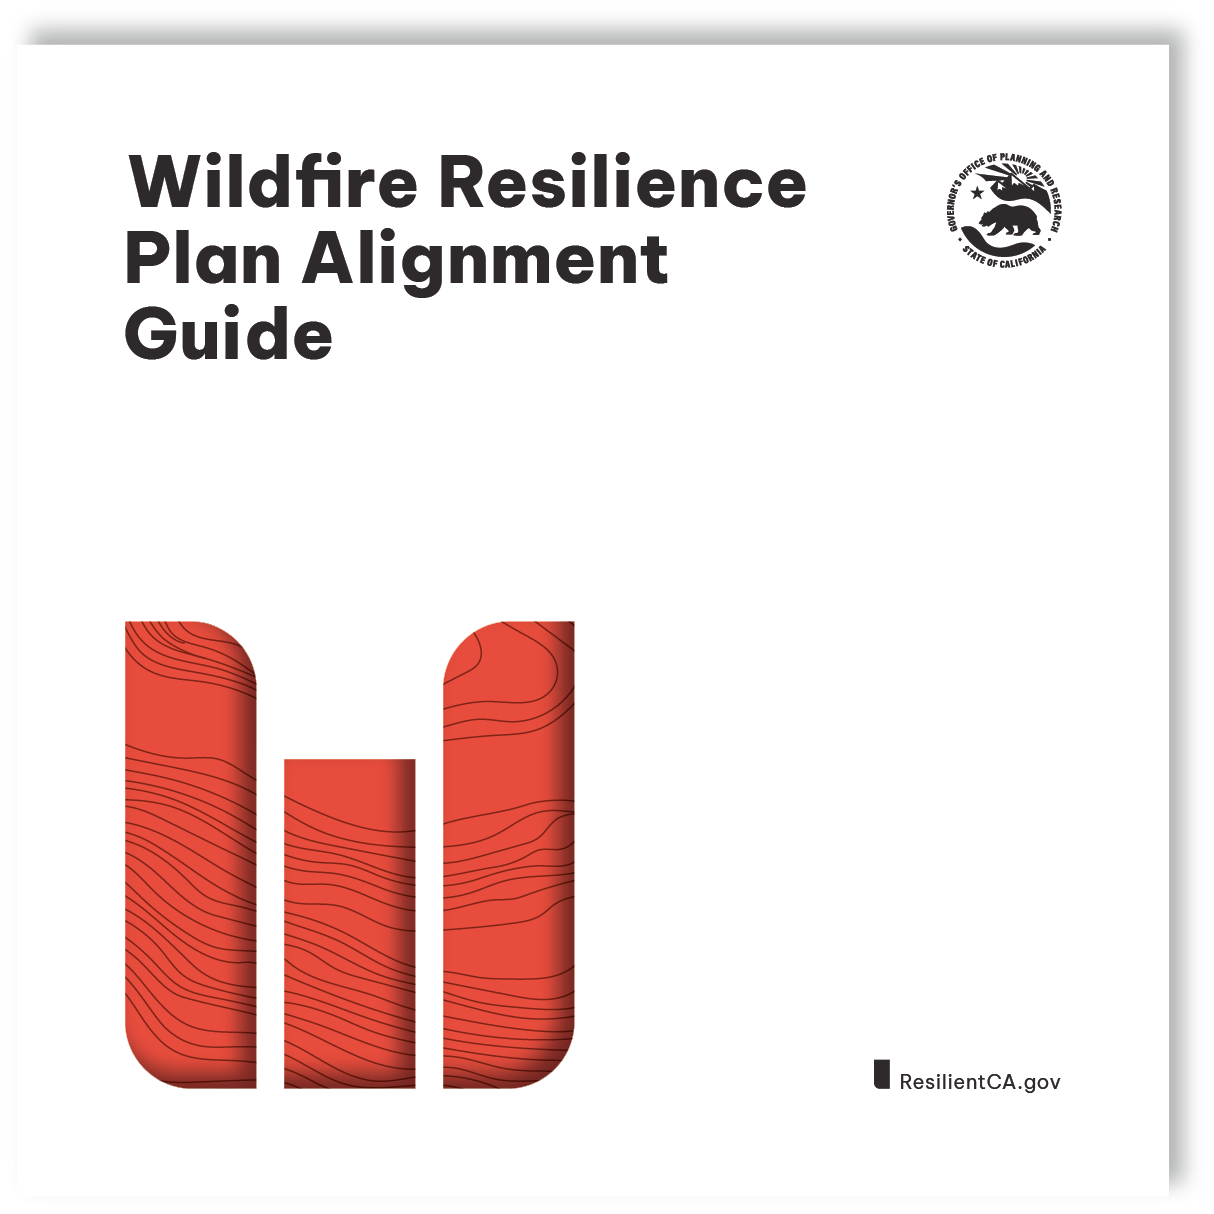 Wildfire Resilience guide report cover